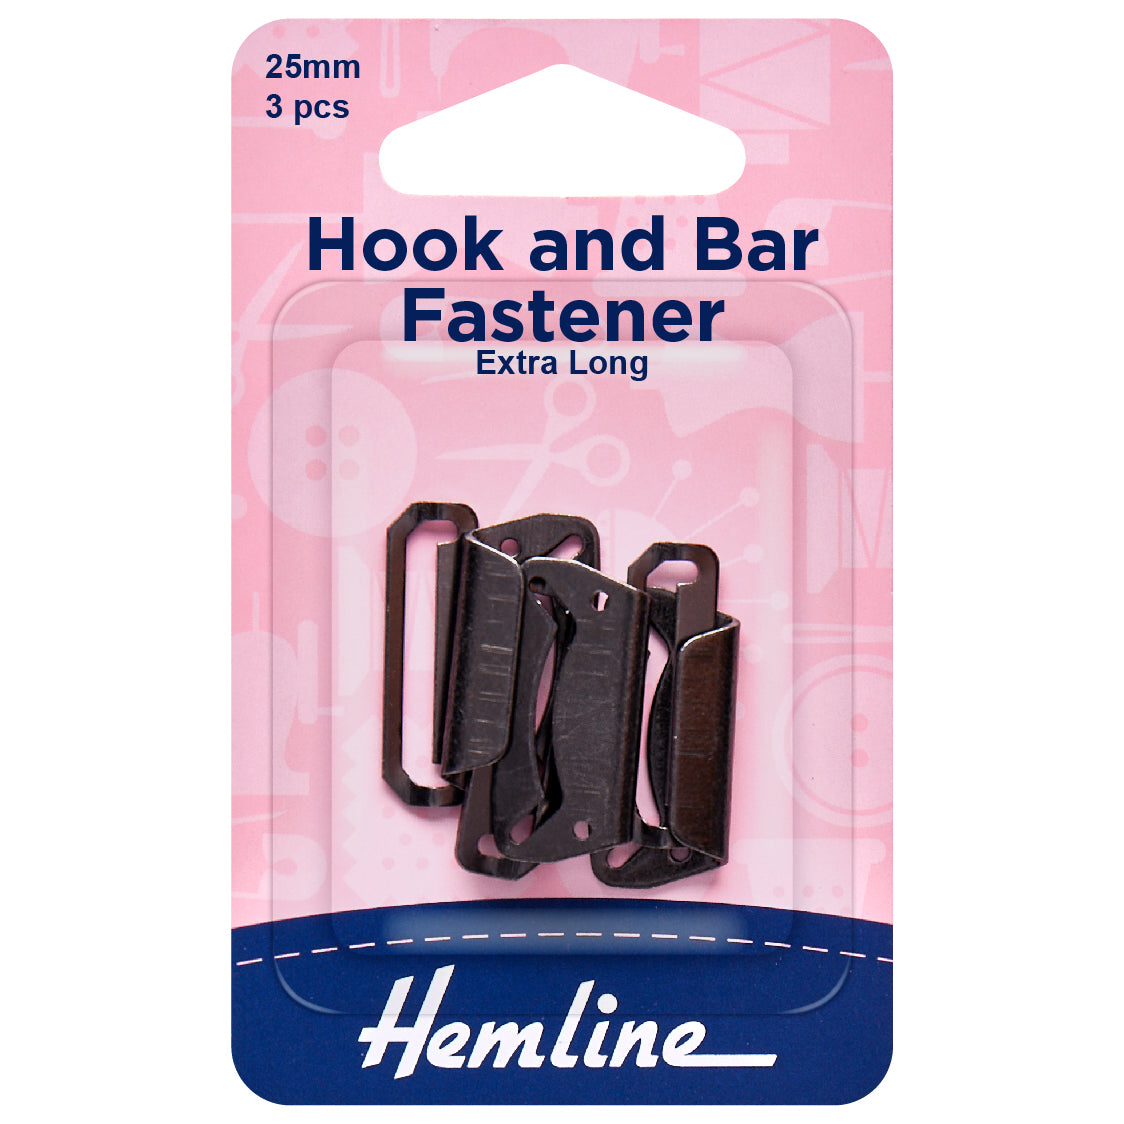 hook and bar: Black - Extra Long 25mm